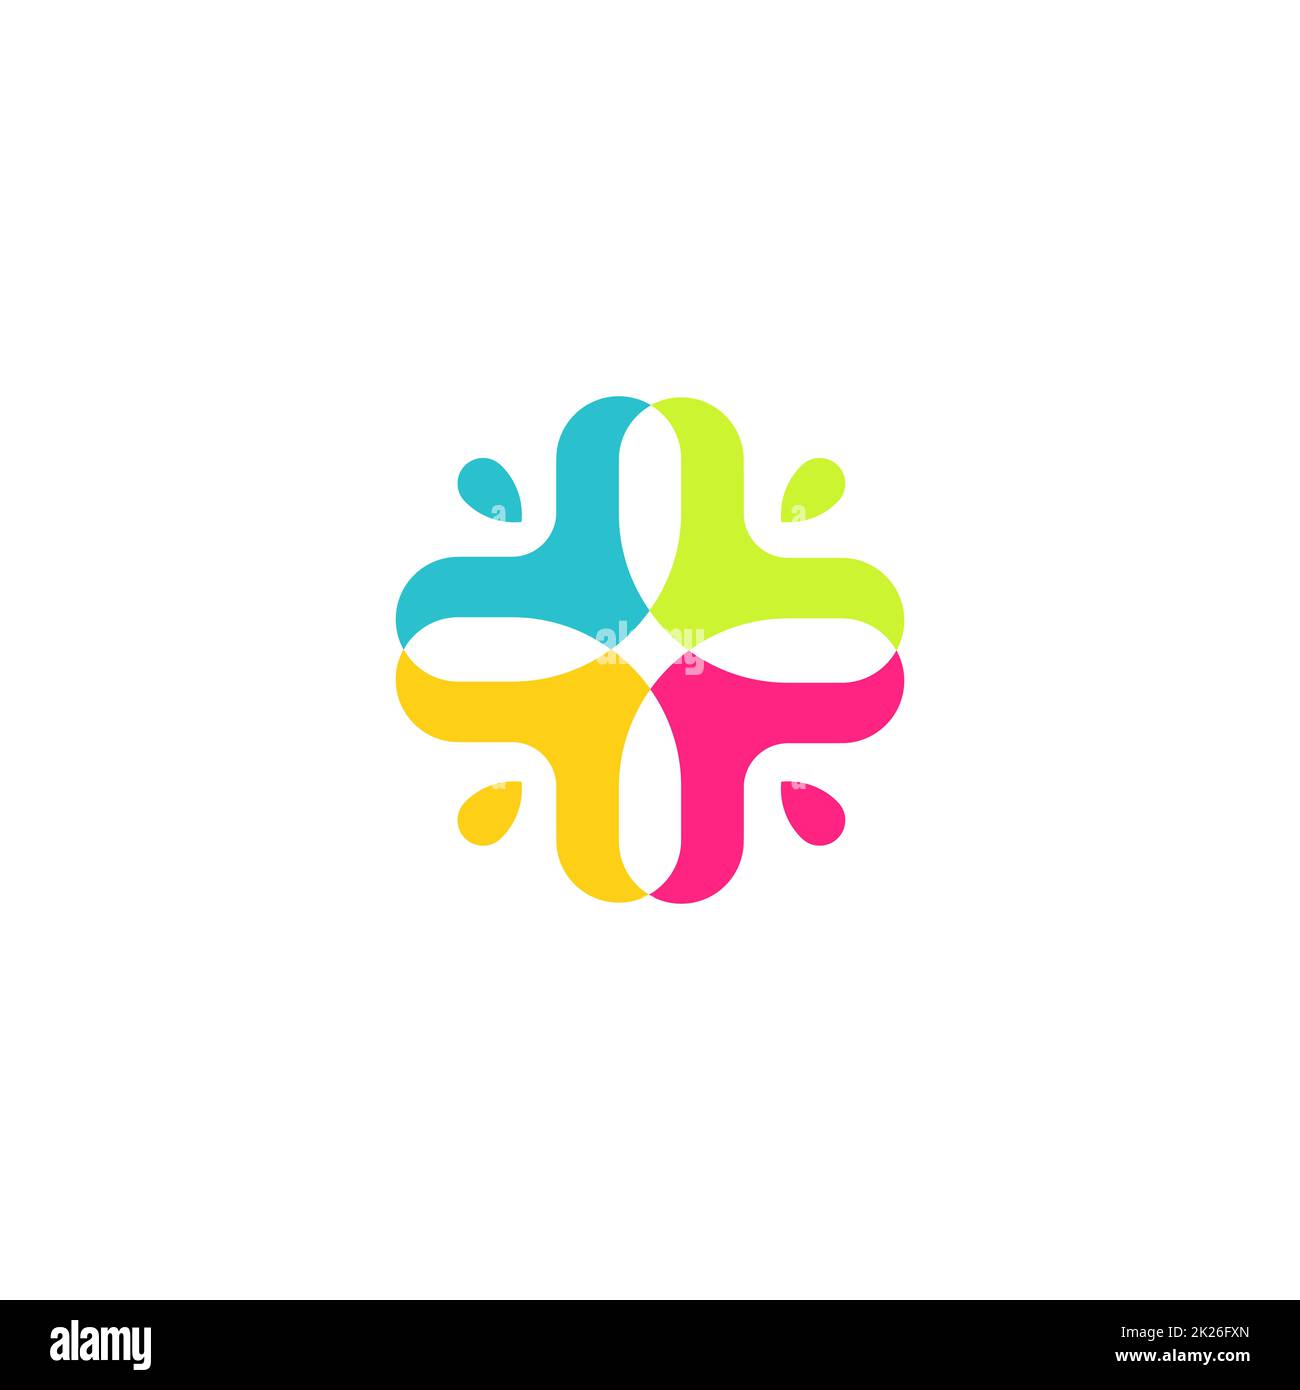 Human hands holder, abstract cross logo template, colorful union vector logo concept for business. Vector logotype Stock Photo